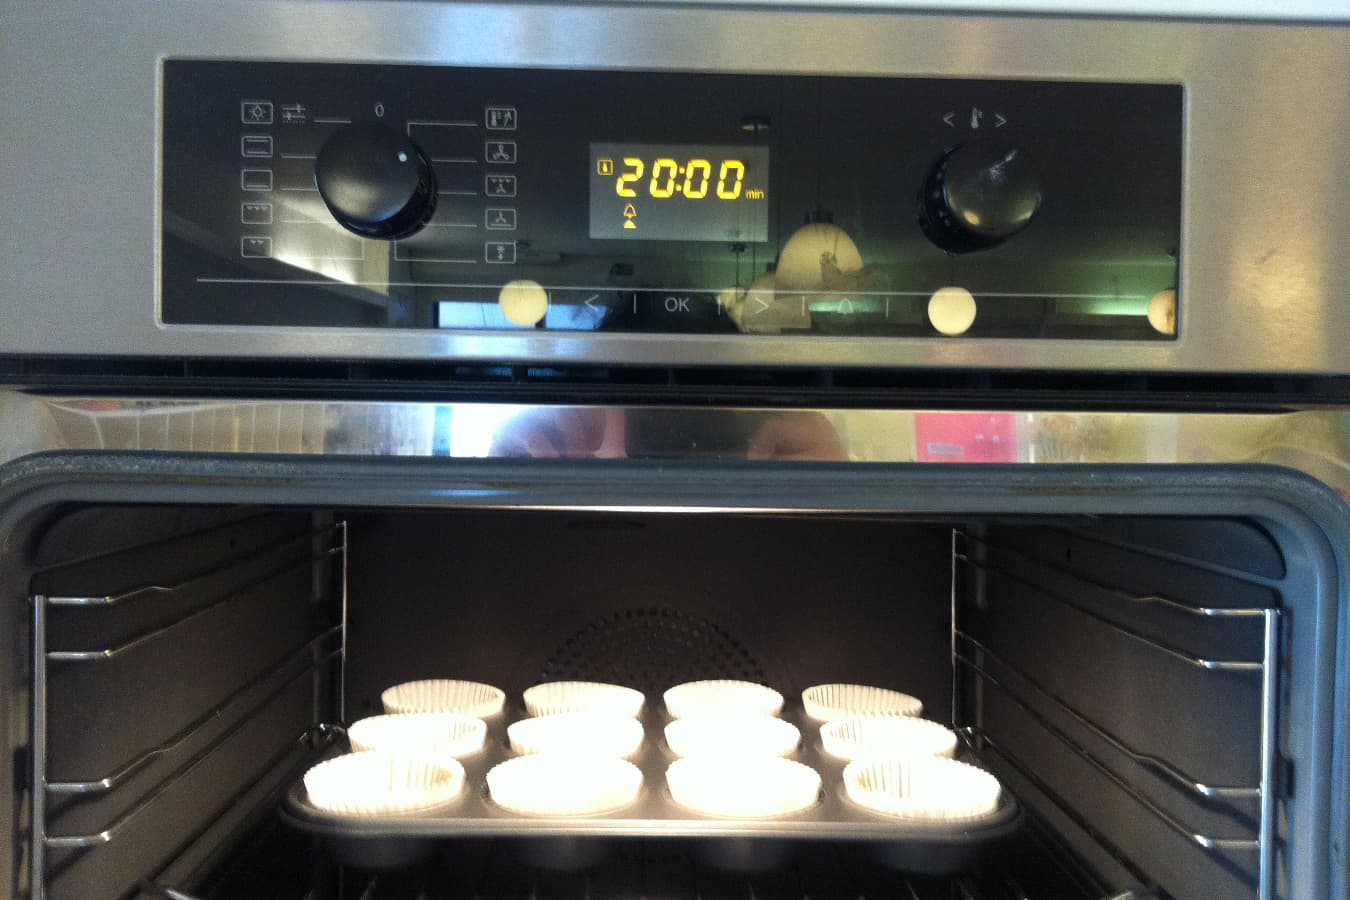 cupcakes in oven